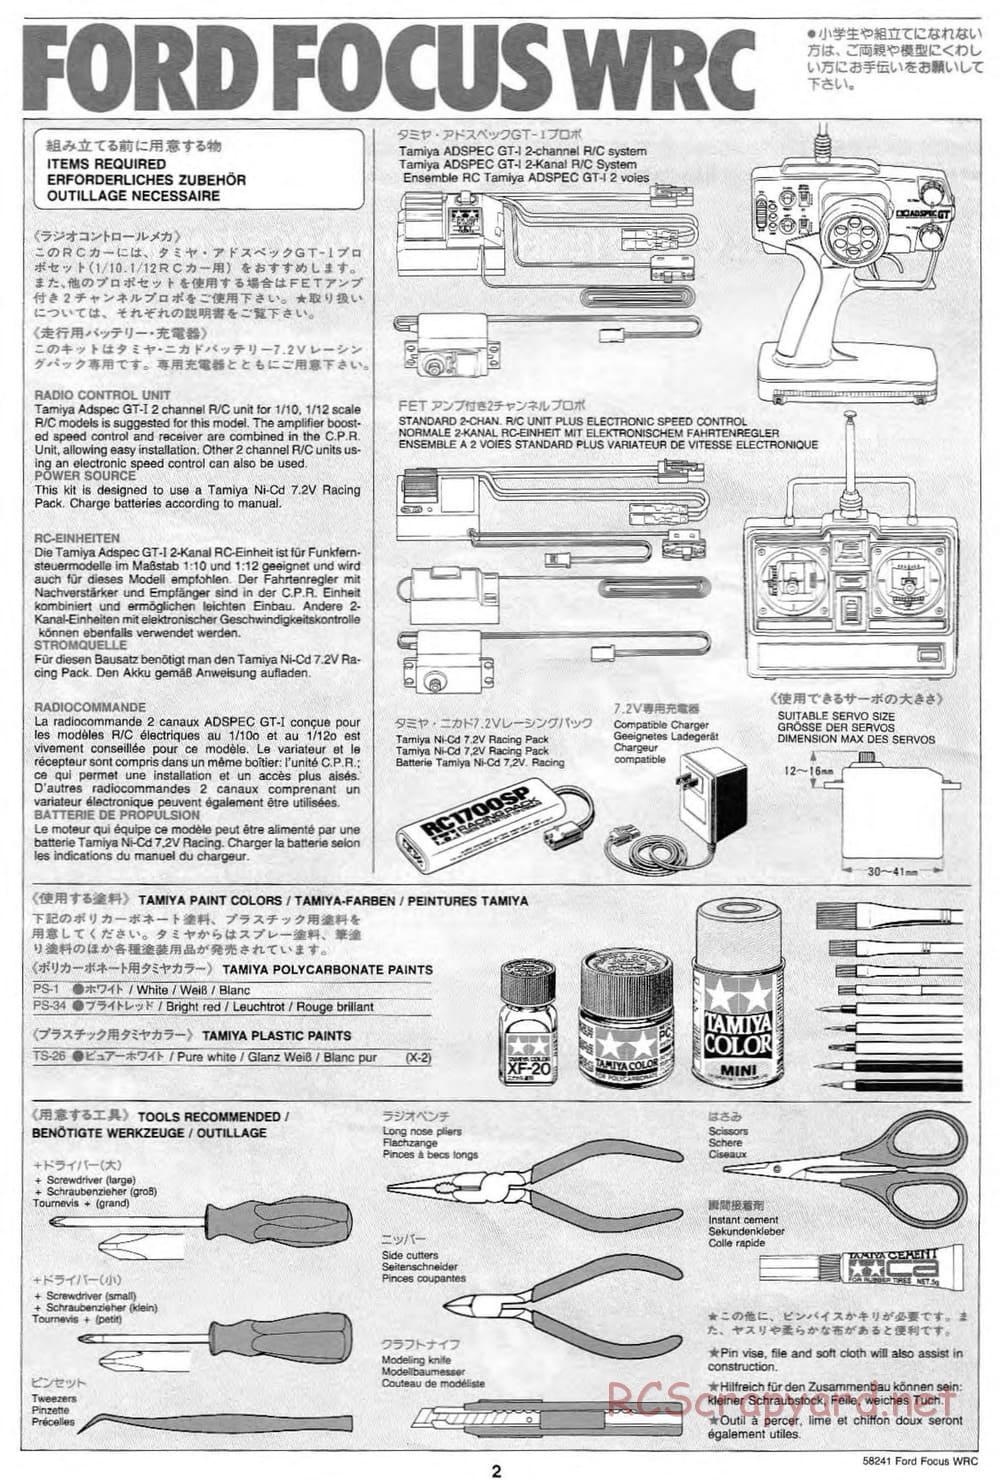 Tamiya - Ford Focus WRC - TL-01 Chassis - Manual - Page 2